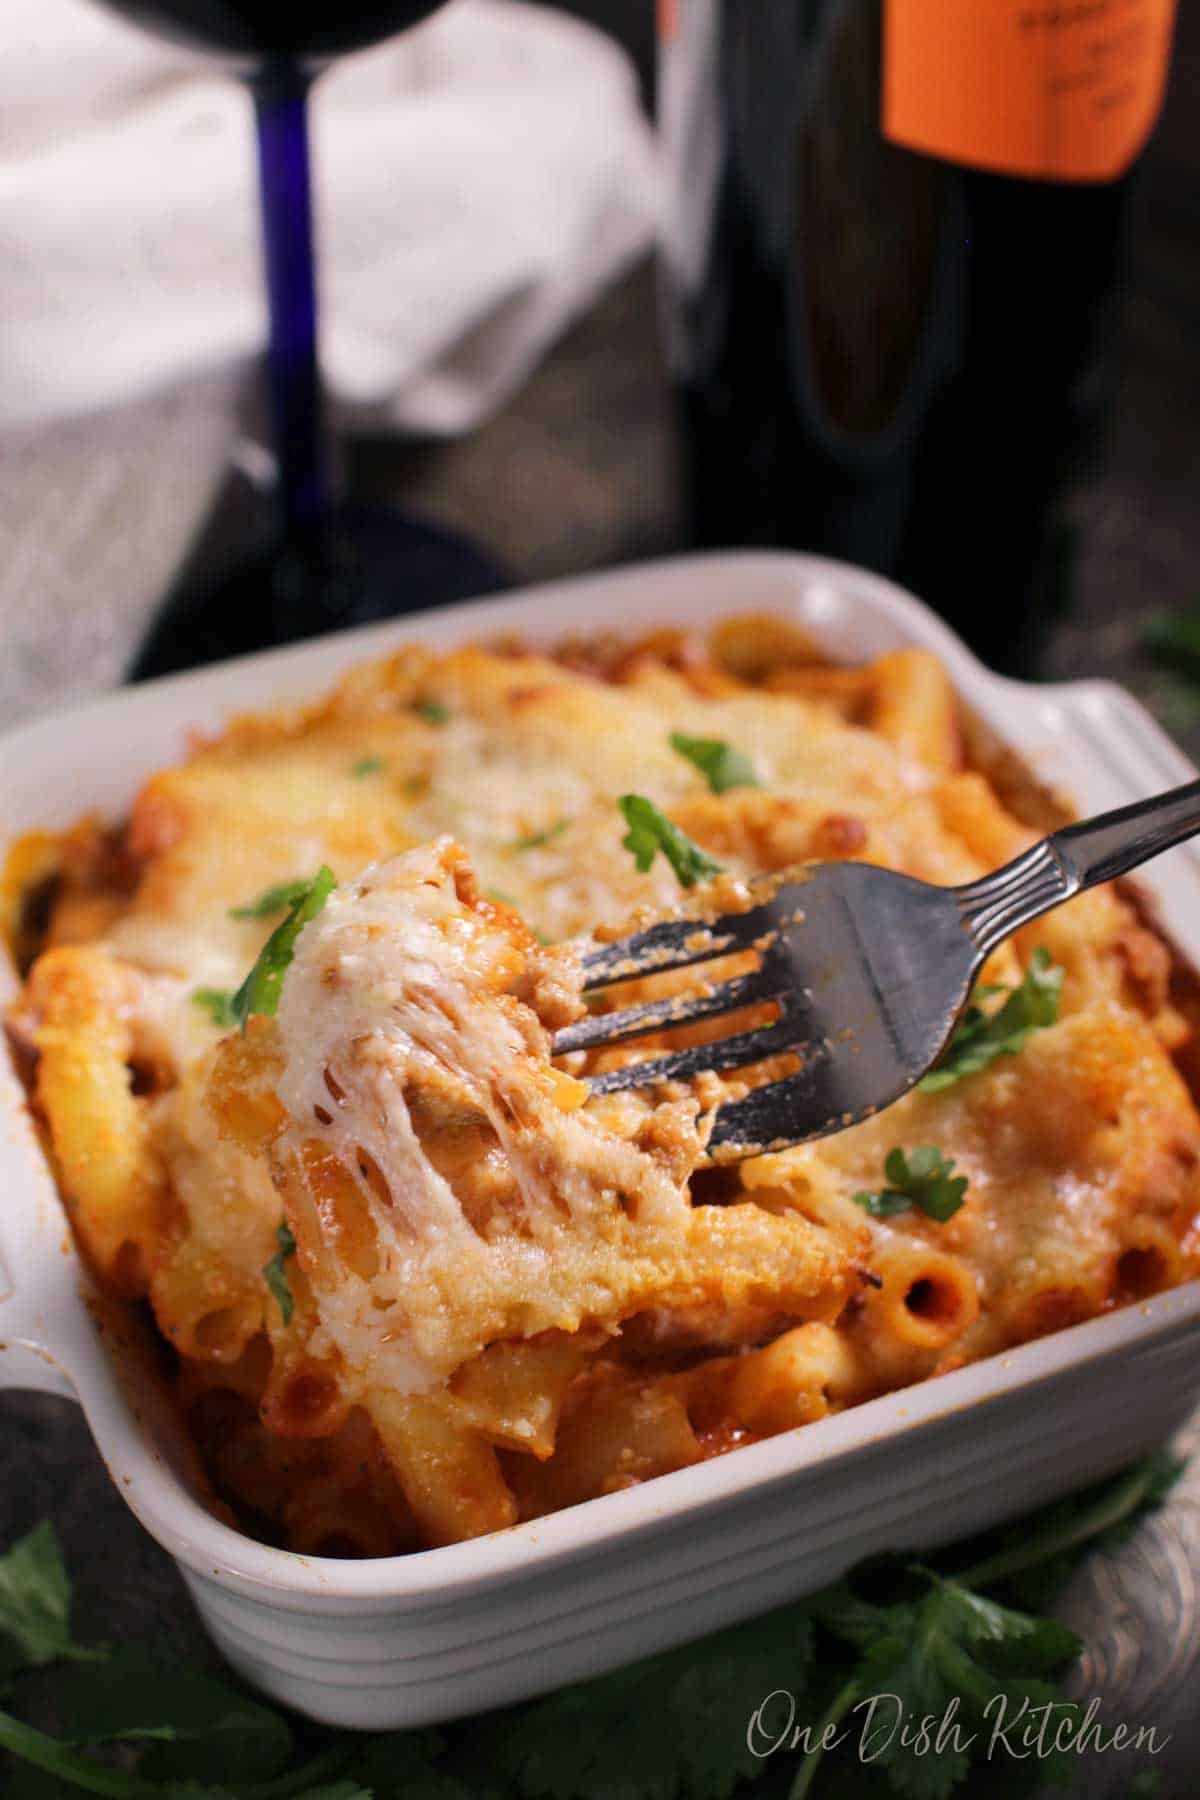 A forkful of a baked ziti casserole with melted cheese hanging from the fork.